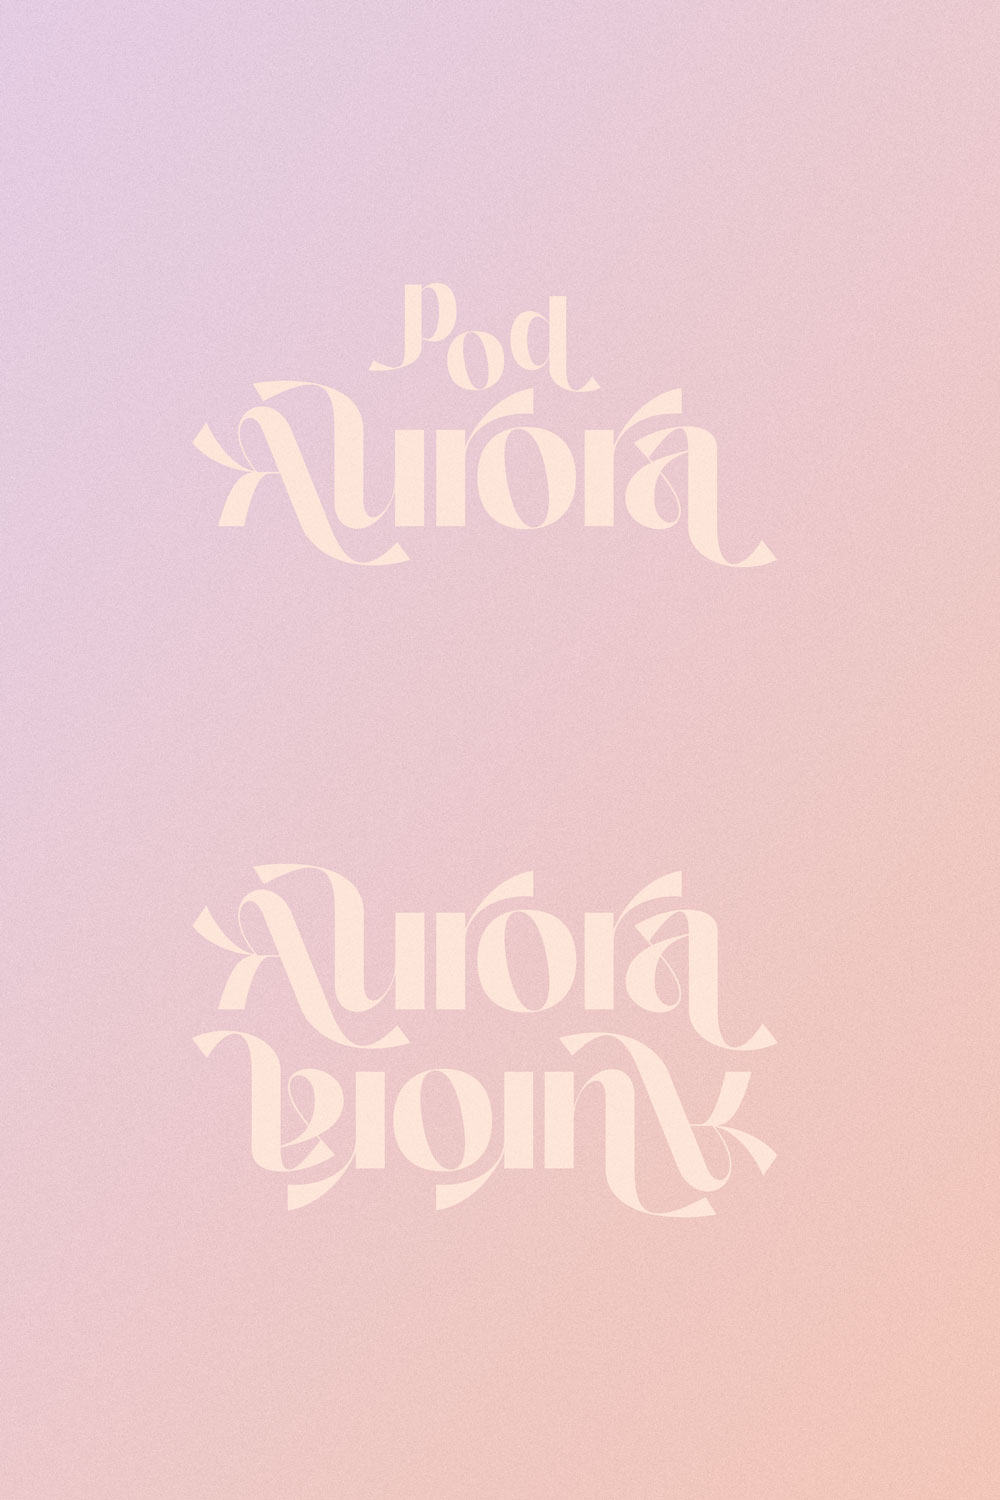 Pod Aurora Logo Options by Everything Here Now